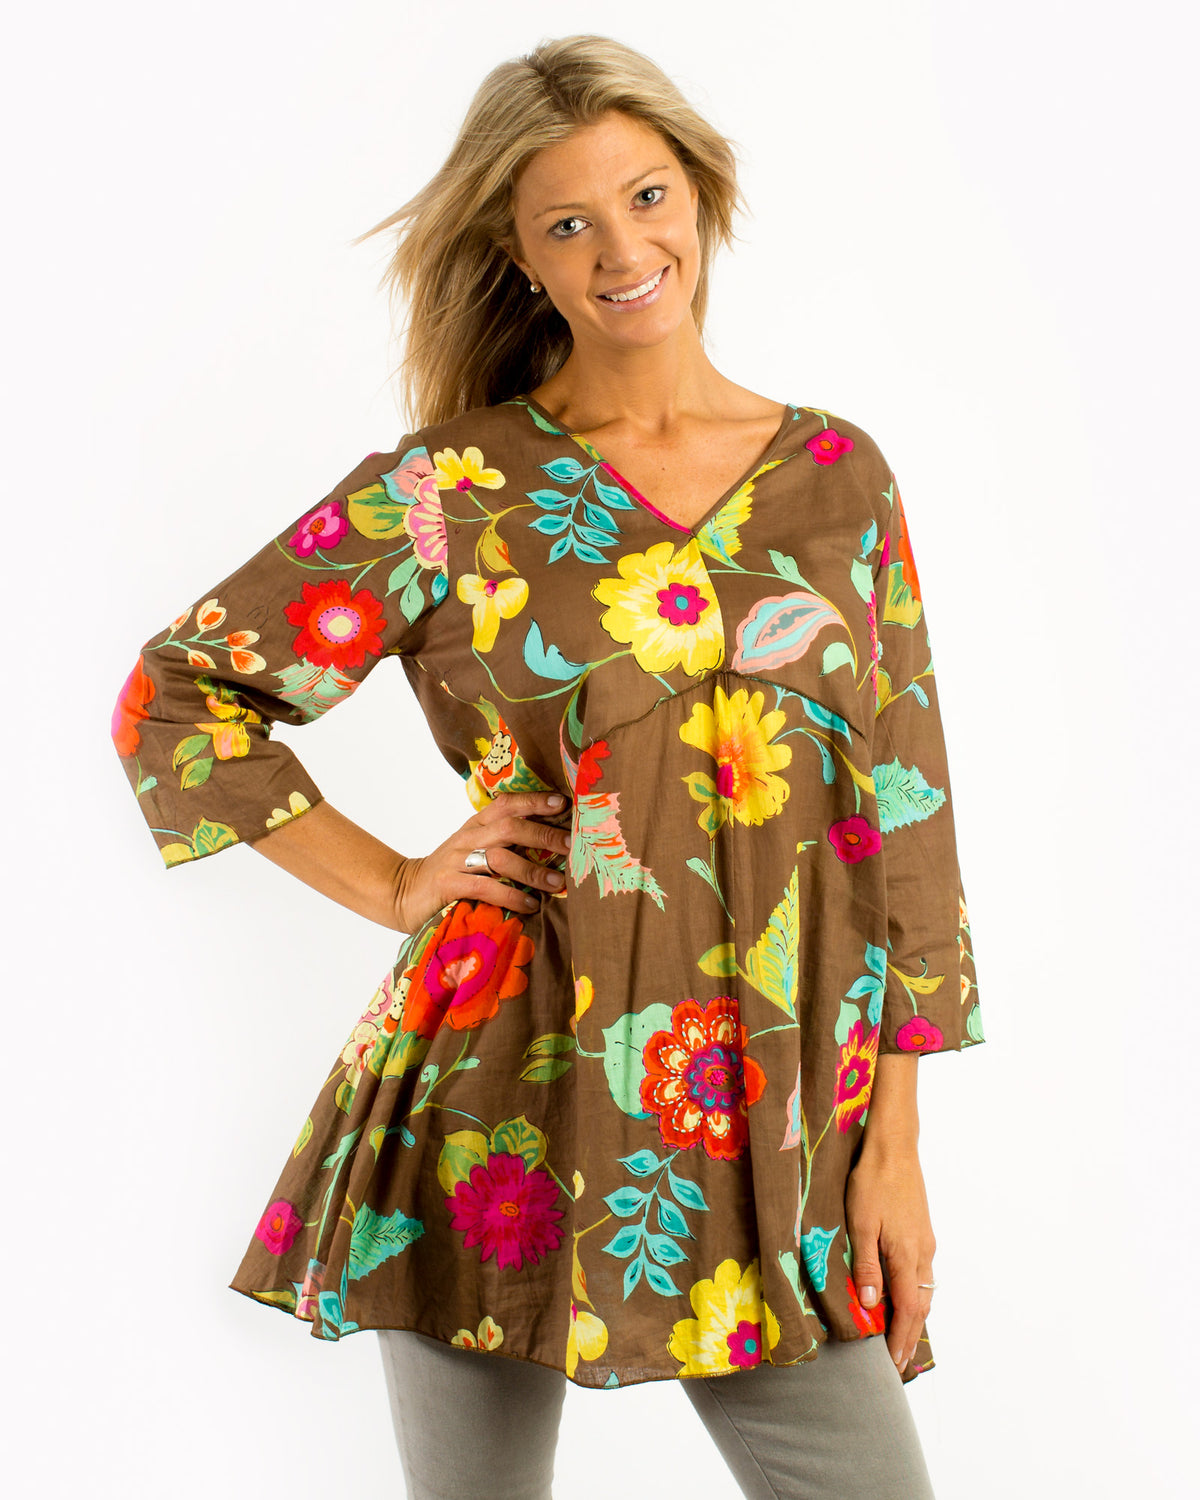 Daintree Top in Chocolate Floral